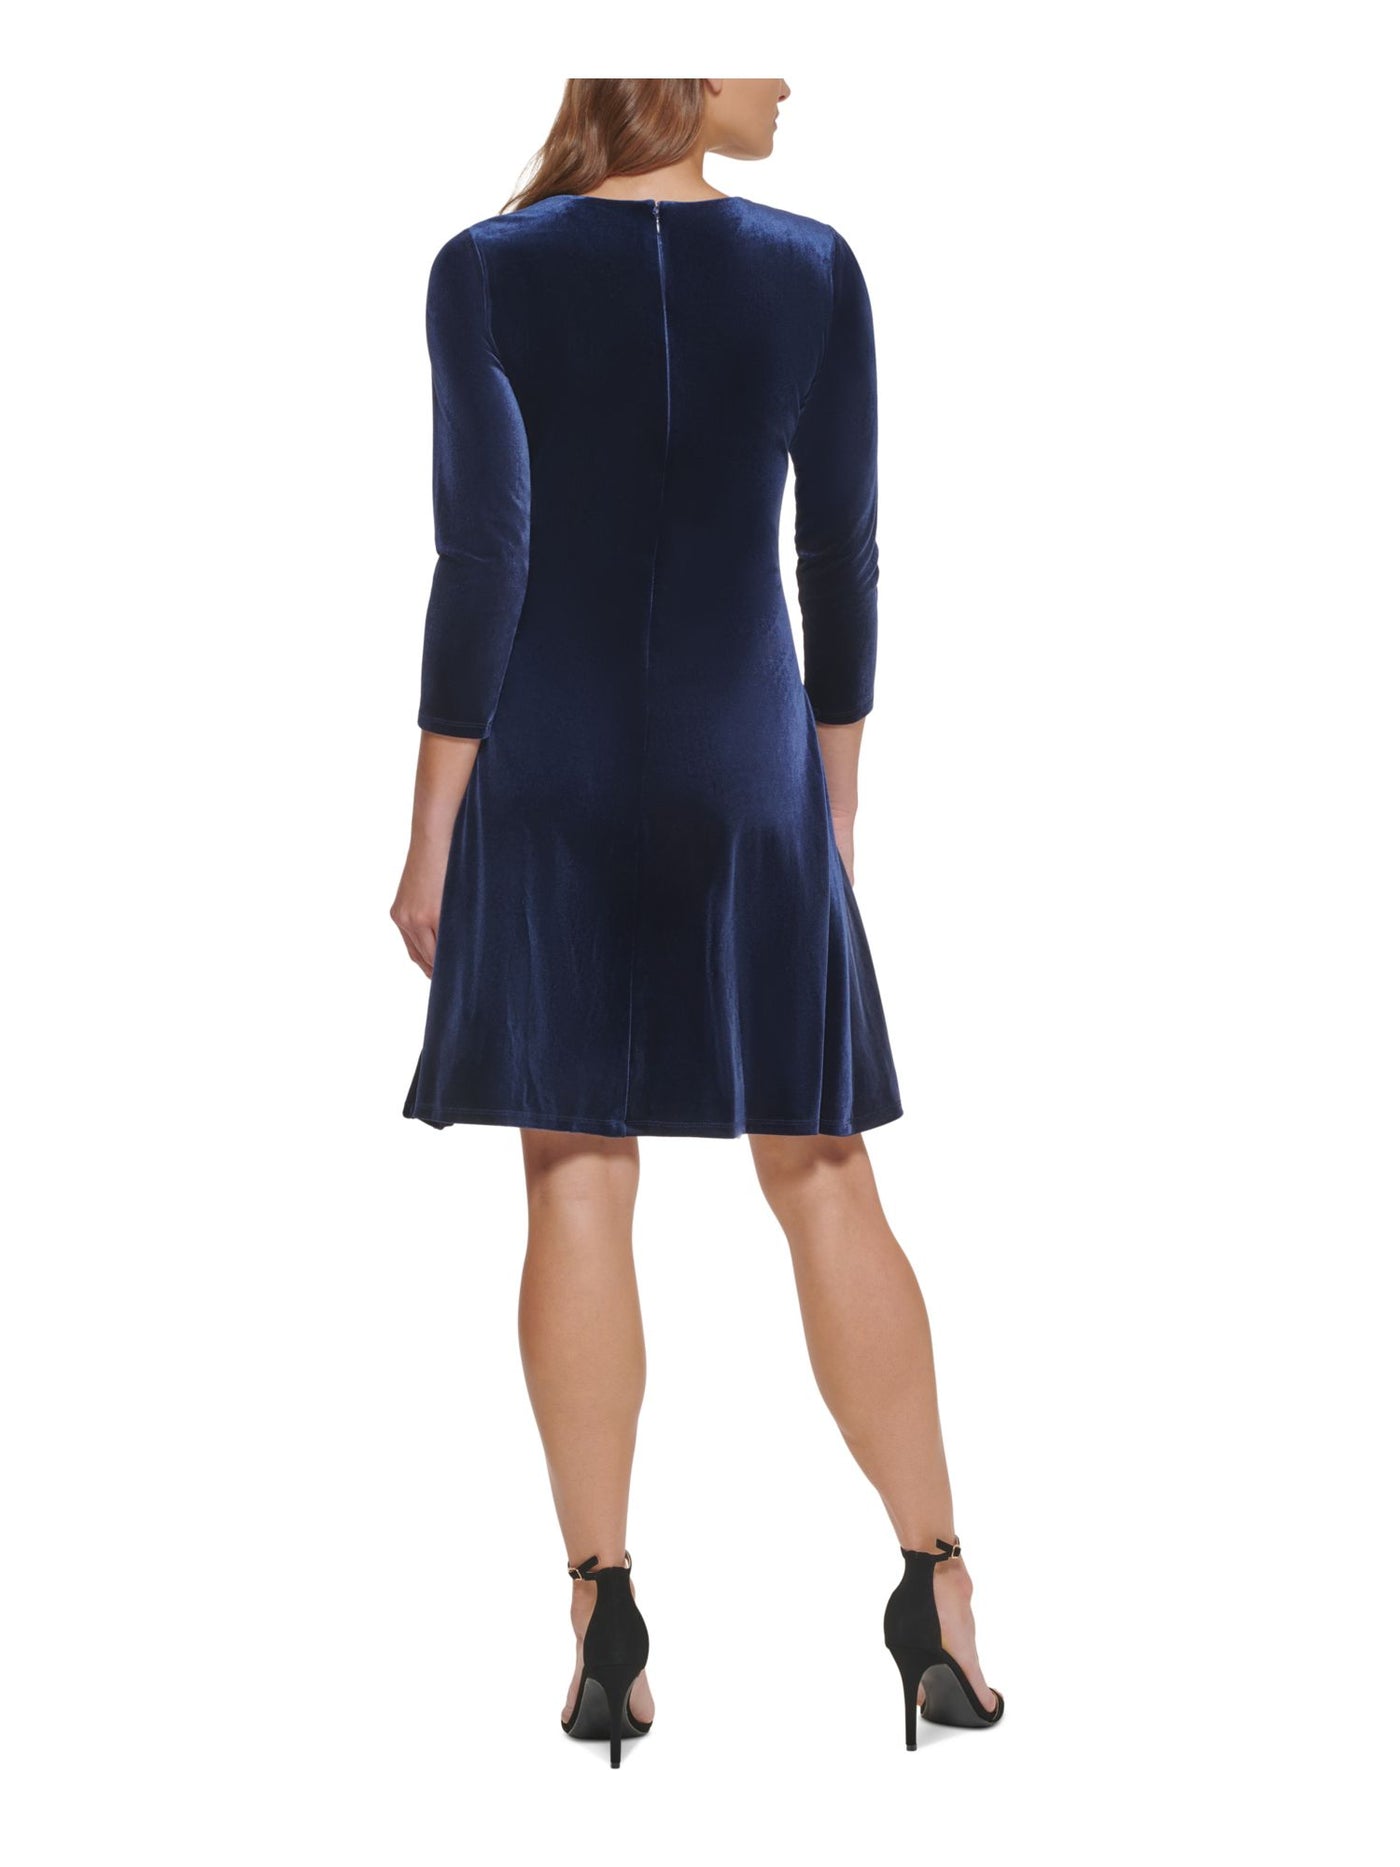 DKNY Womens Stretch Zippered Twist Front Velvet 3/4 Sleeve Jewel Neck Above The Knee Party Fit + Flare Dress